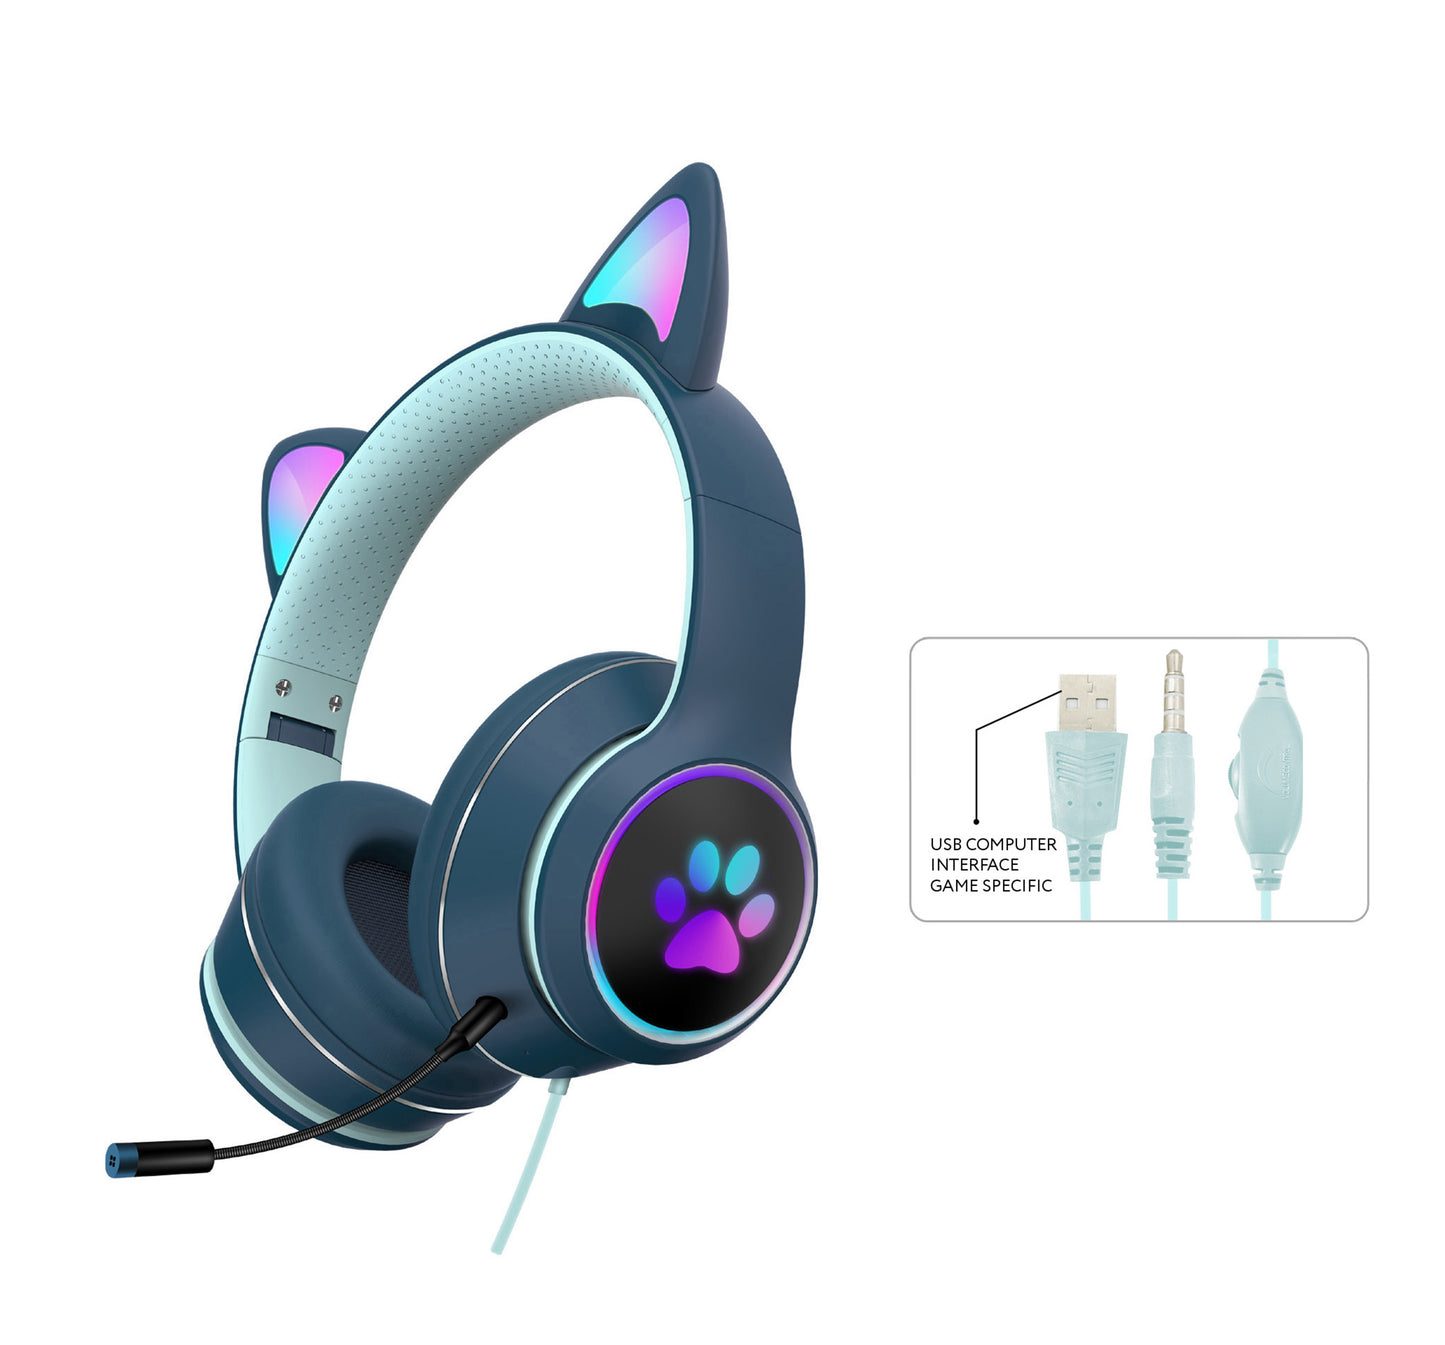 RGB Luminous Cat LED Gaming Headset - Multi-Platform Wired with Noise Reduction (Emerald Green)